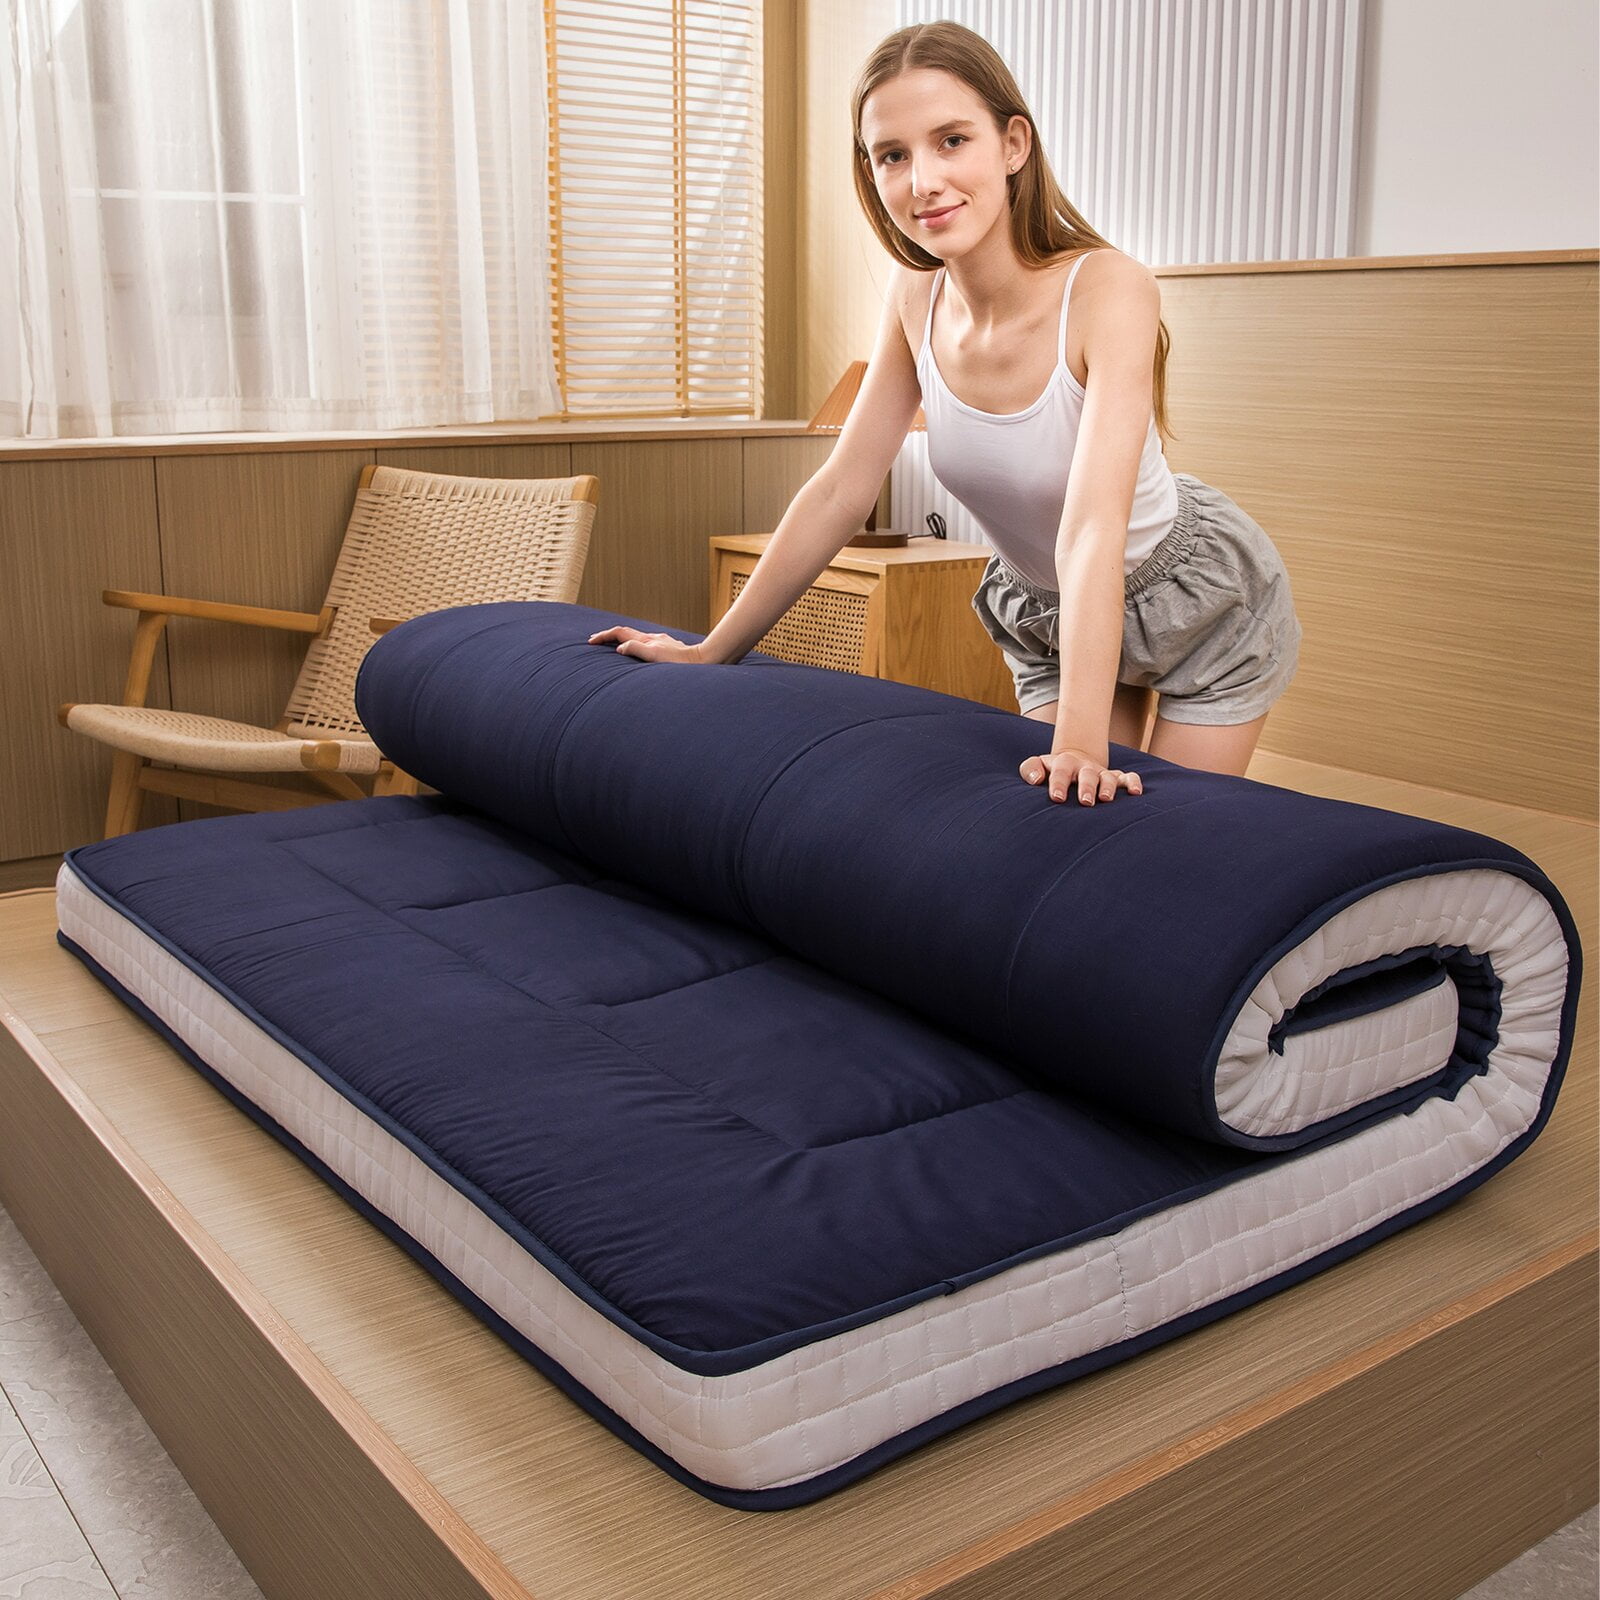 Cotton Thick Mattress Breathable Warm Bed Foldable topper Tatami floor All Sizes 